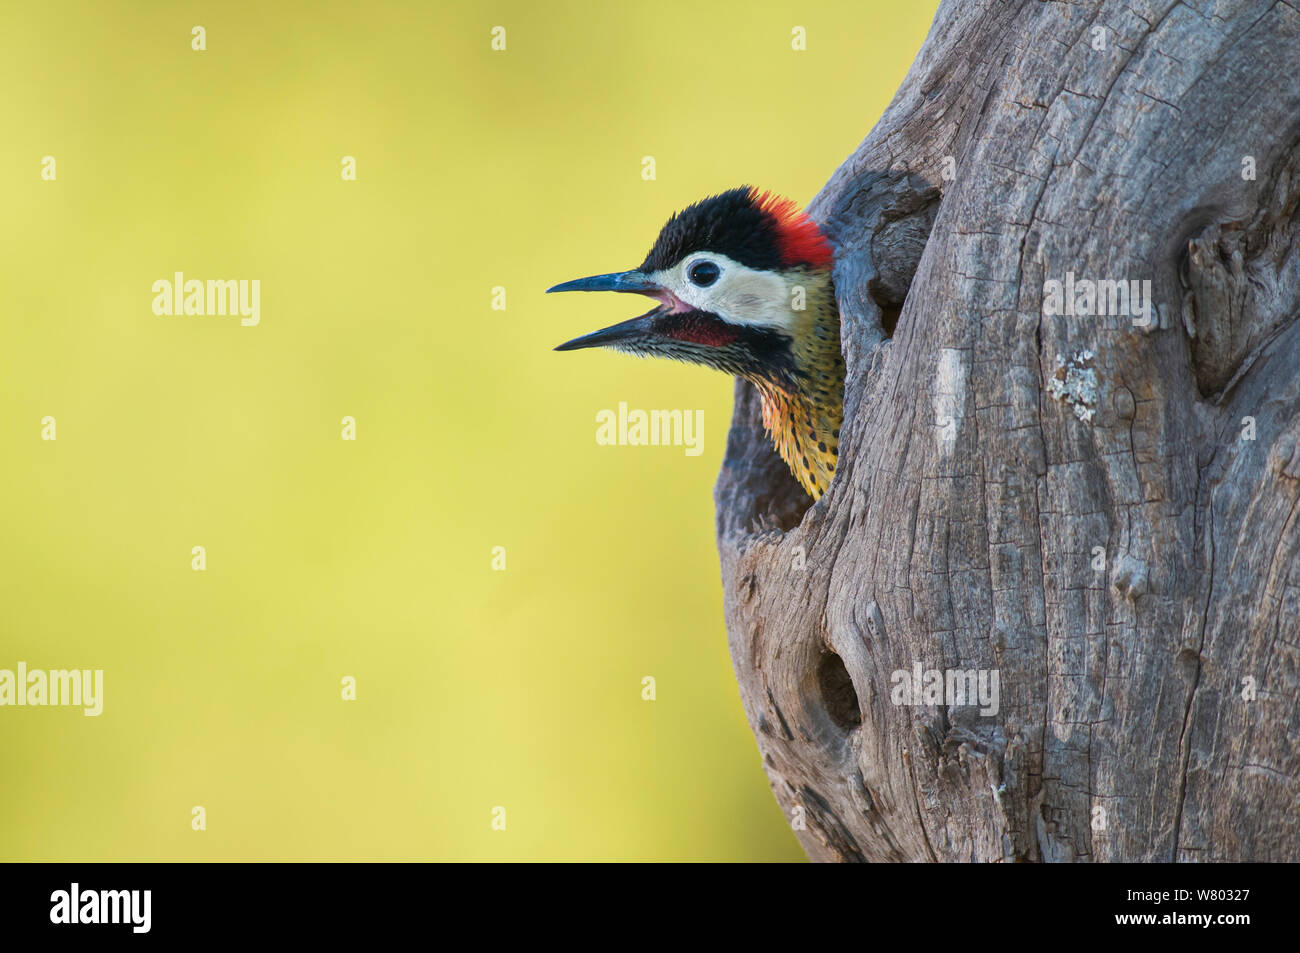 Green-barred woodpecker (Colaptes melanochloros) male peering out of nest hole, La Pampa, Argentina Stock Photo